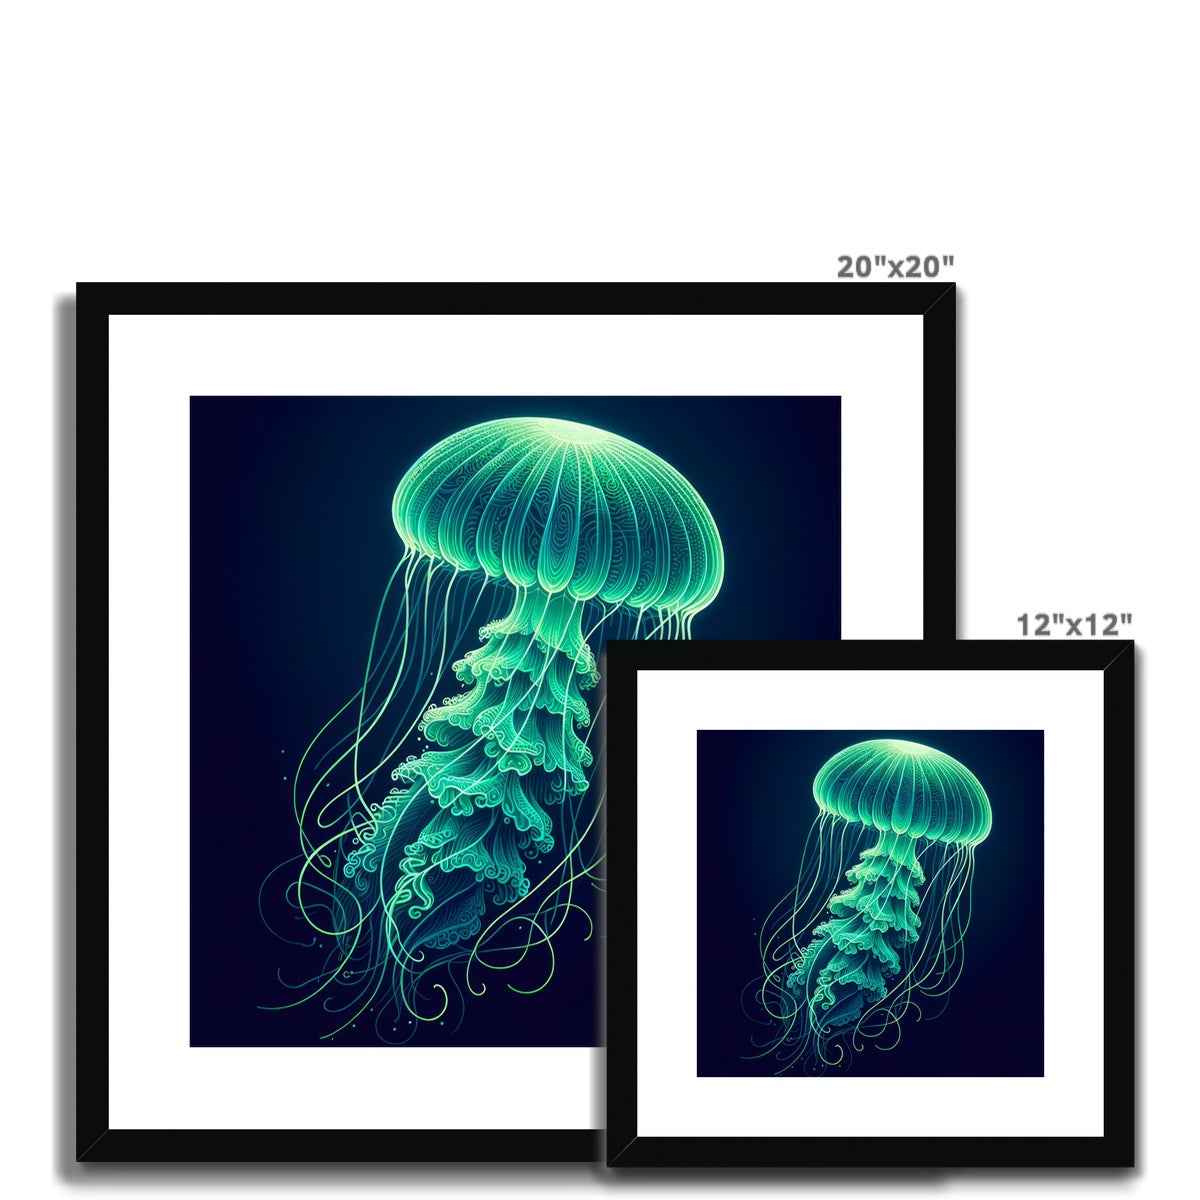 Jellyfish | Framed and Mounted Print